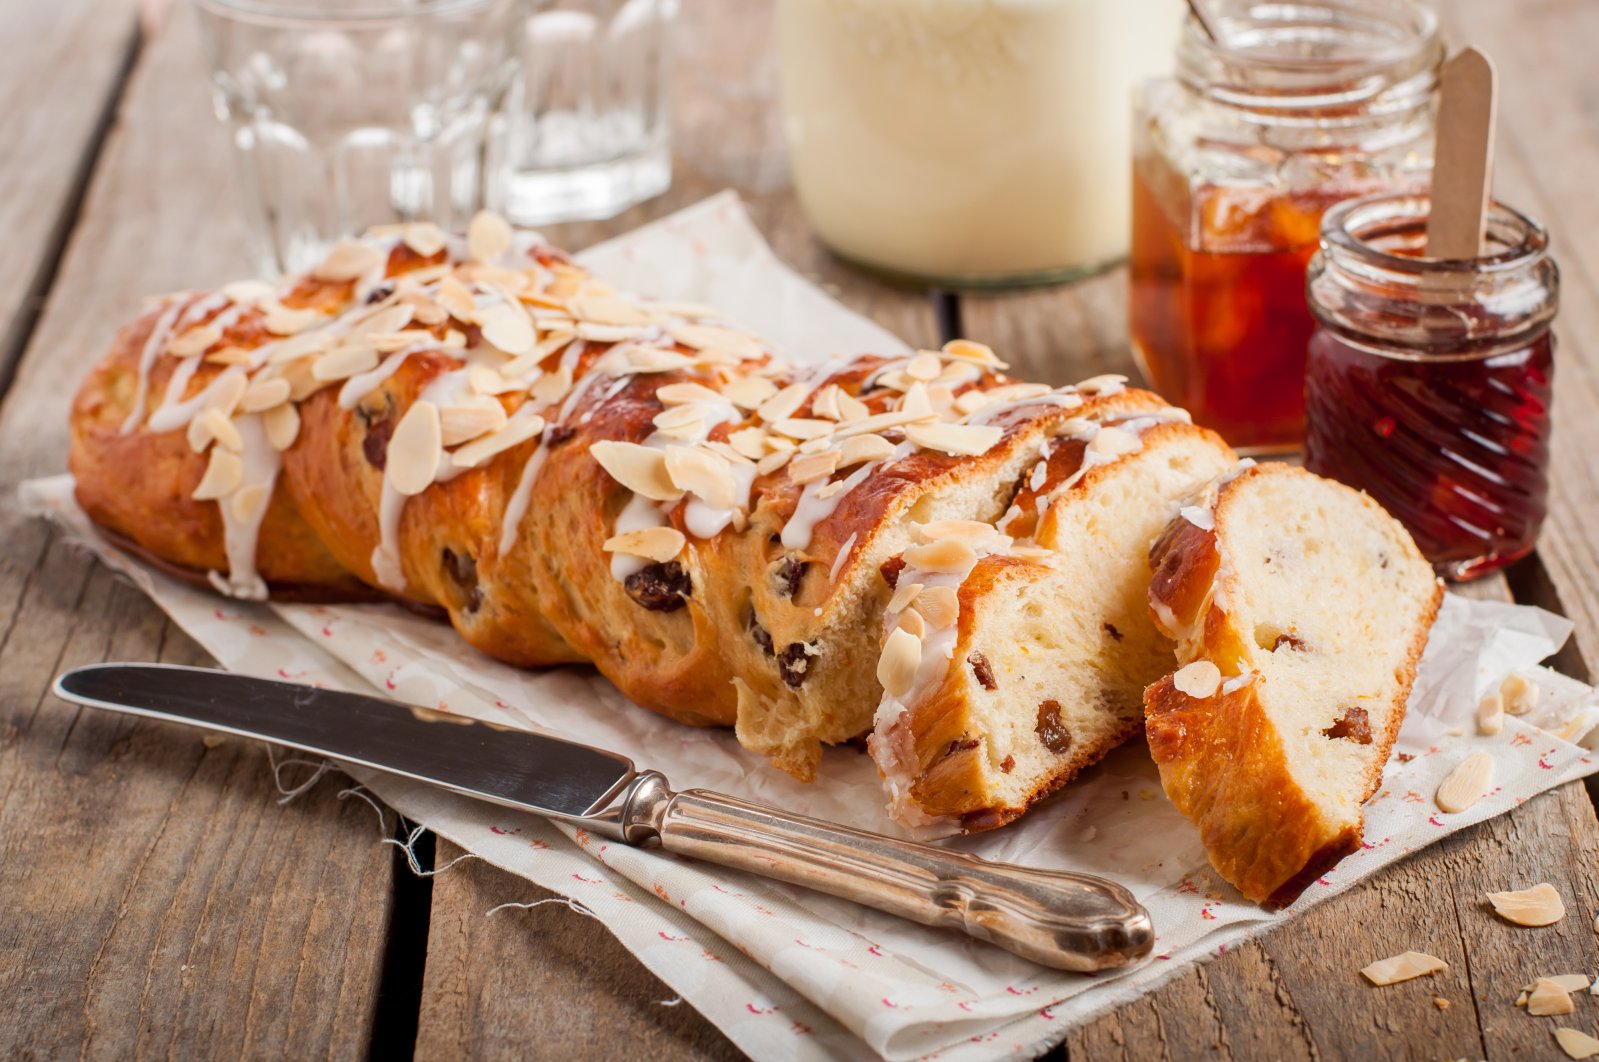 Braided Bread is an Easter classic but it tastes great all year round. (Shutterstock Photo)